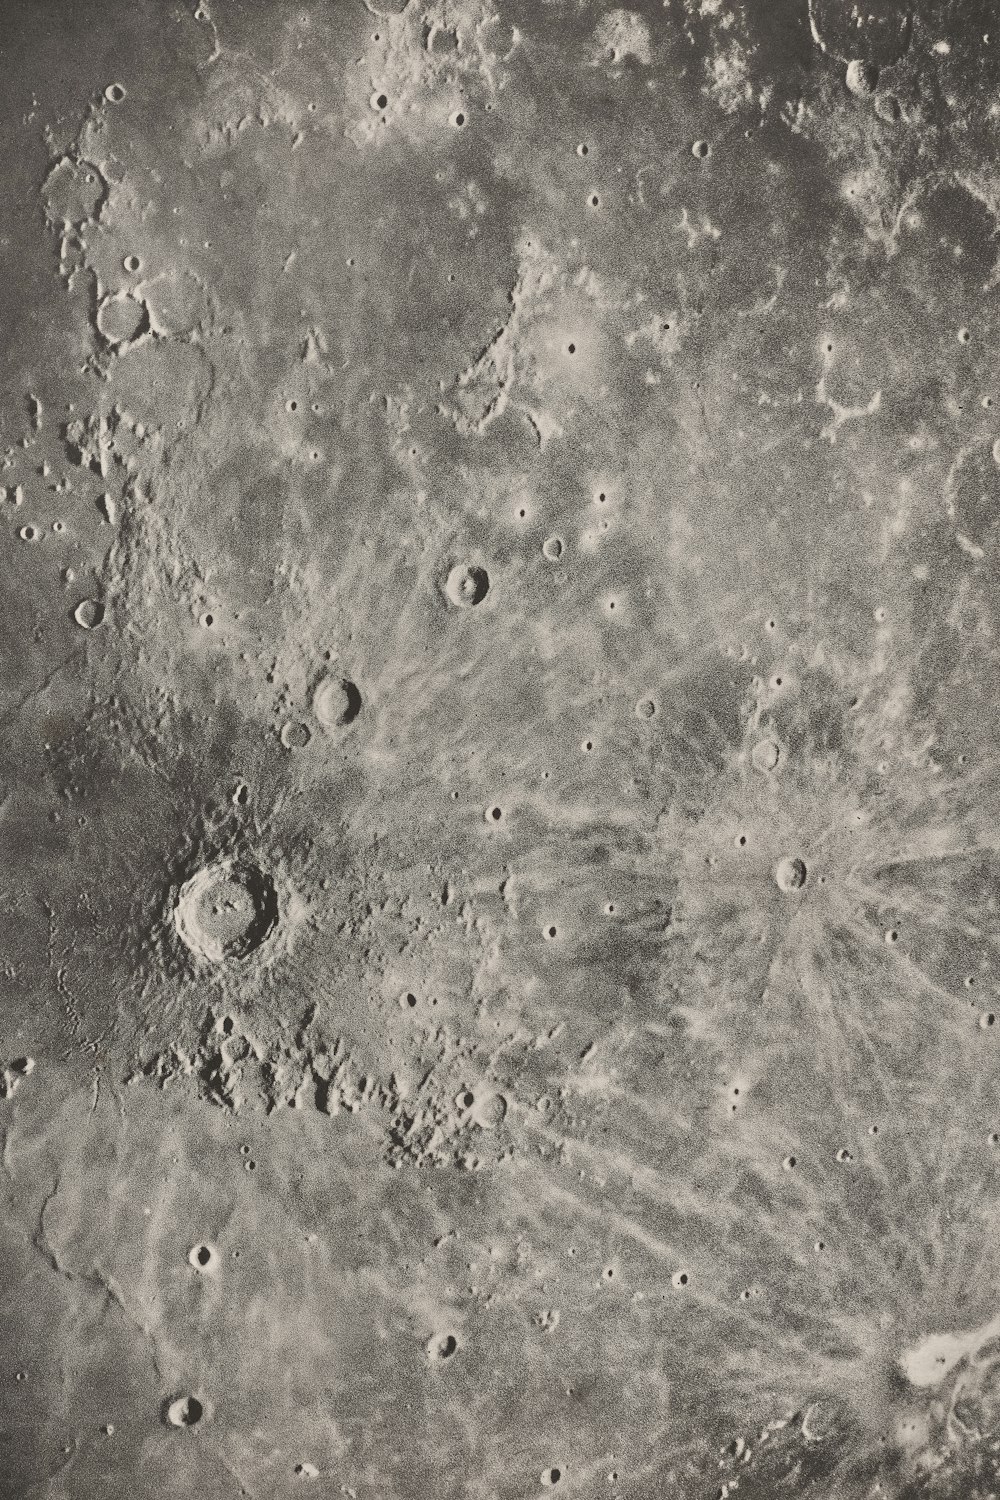 a view of the surface of the moon from space